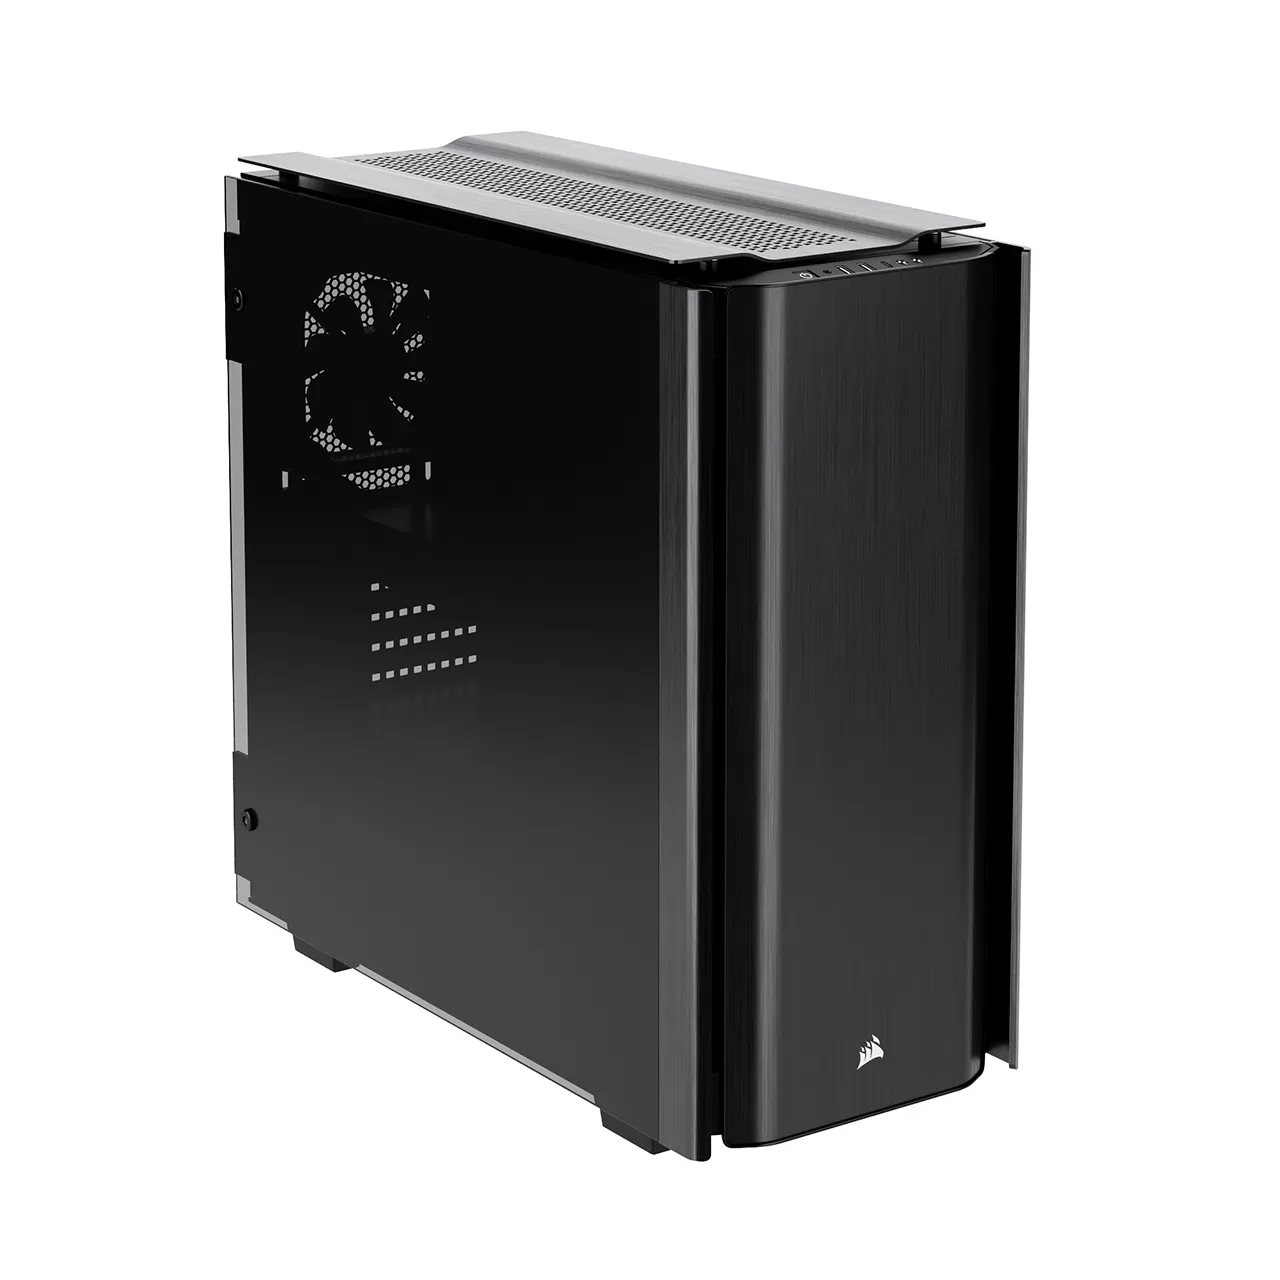 Products – obsidian-series-500d-premium-mid-tower-case-by-corsair